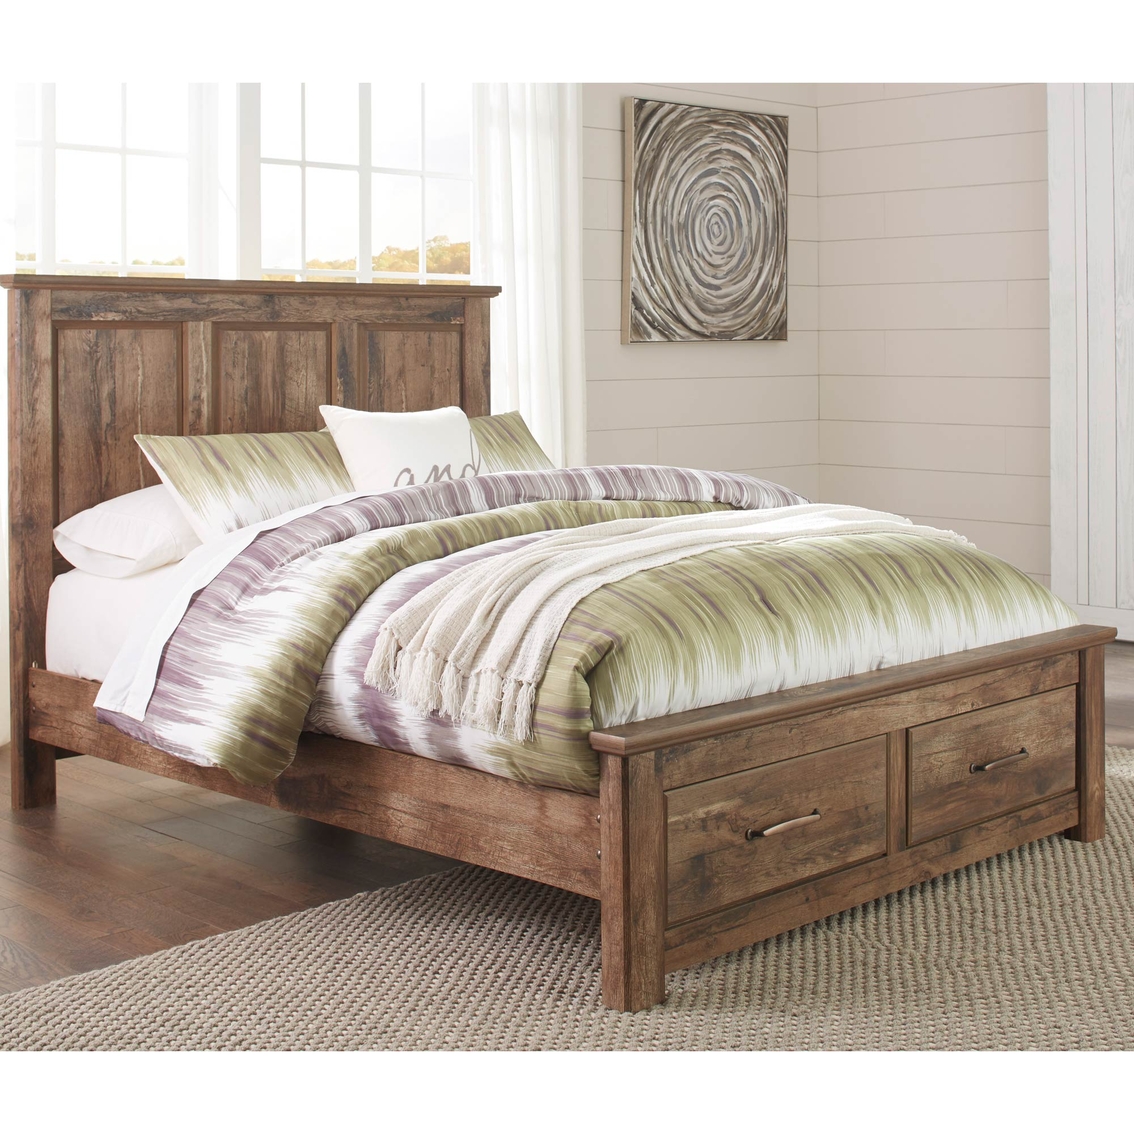 Signature Design by Ashley Blaneville Storage Bed - Image 2 of 4